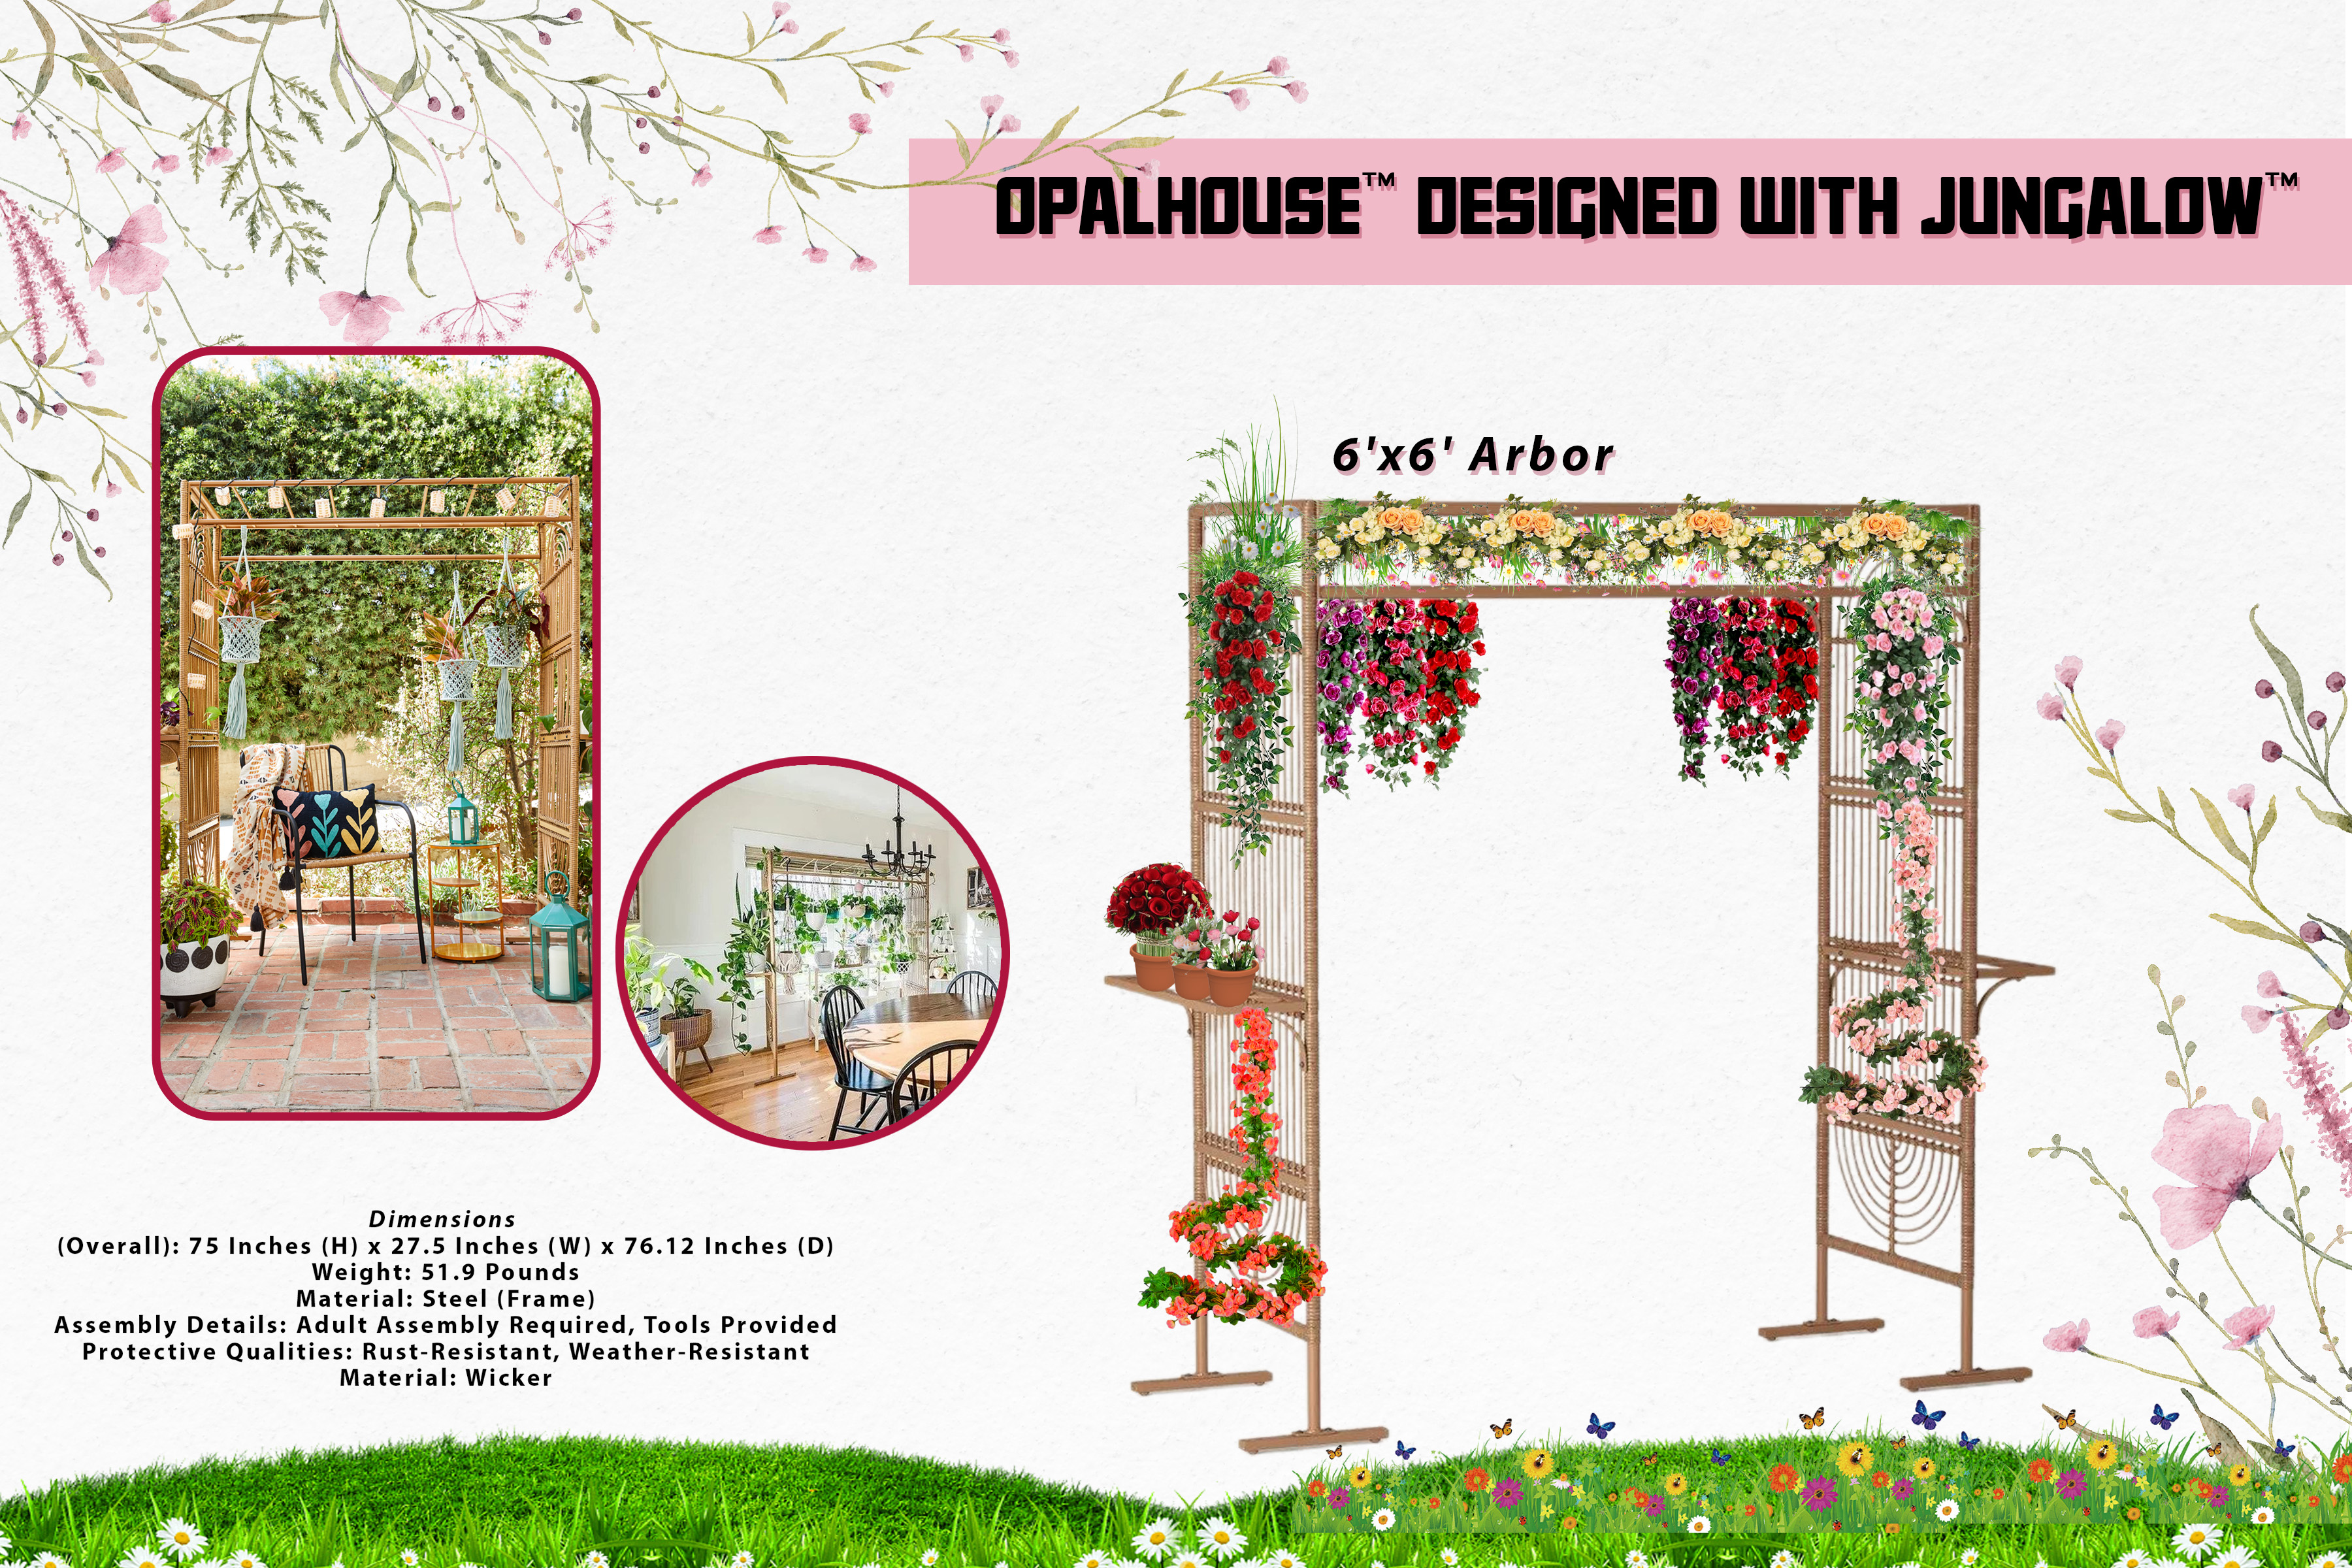 Opalhouse™ designed with Jungalow™ BackyardArbor 6'x6' decorate